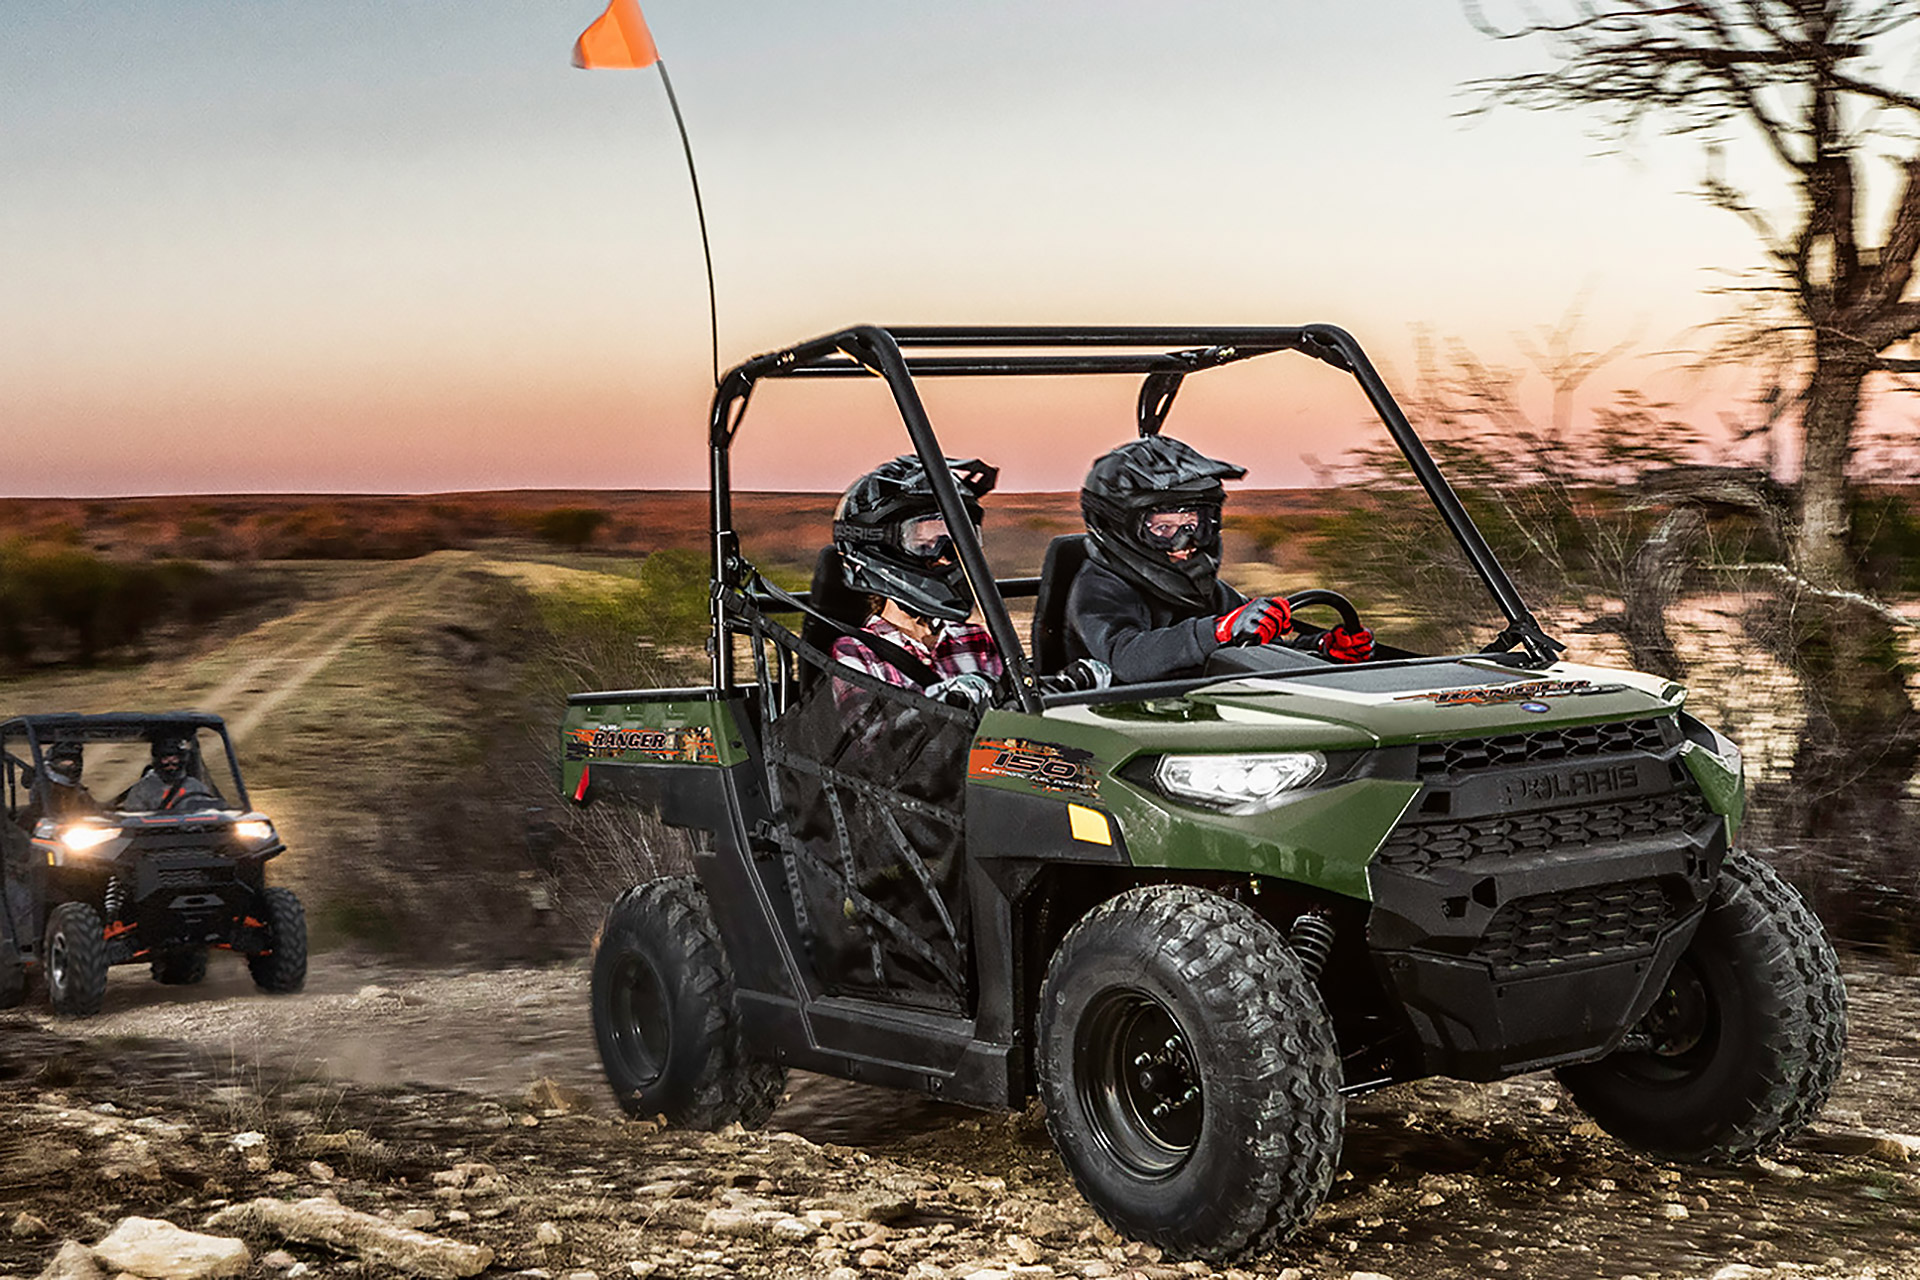 Polaris Ranger Youth Side By Side ATV Uncrate